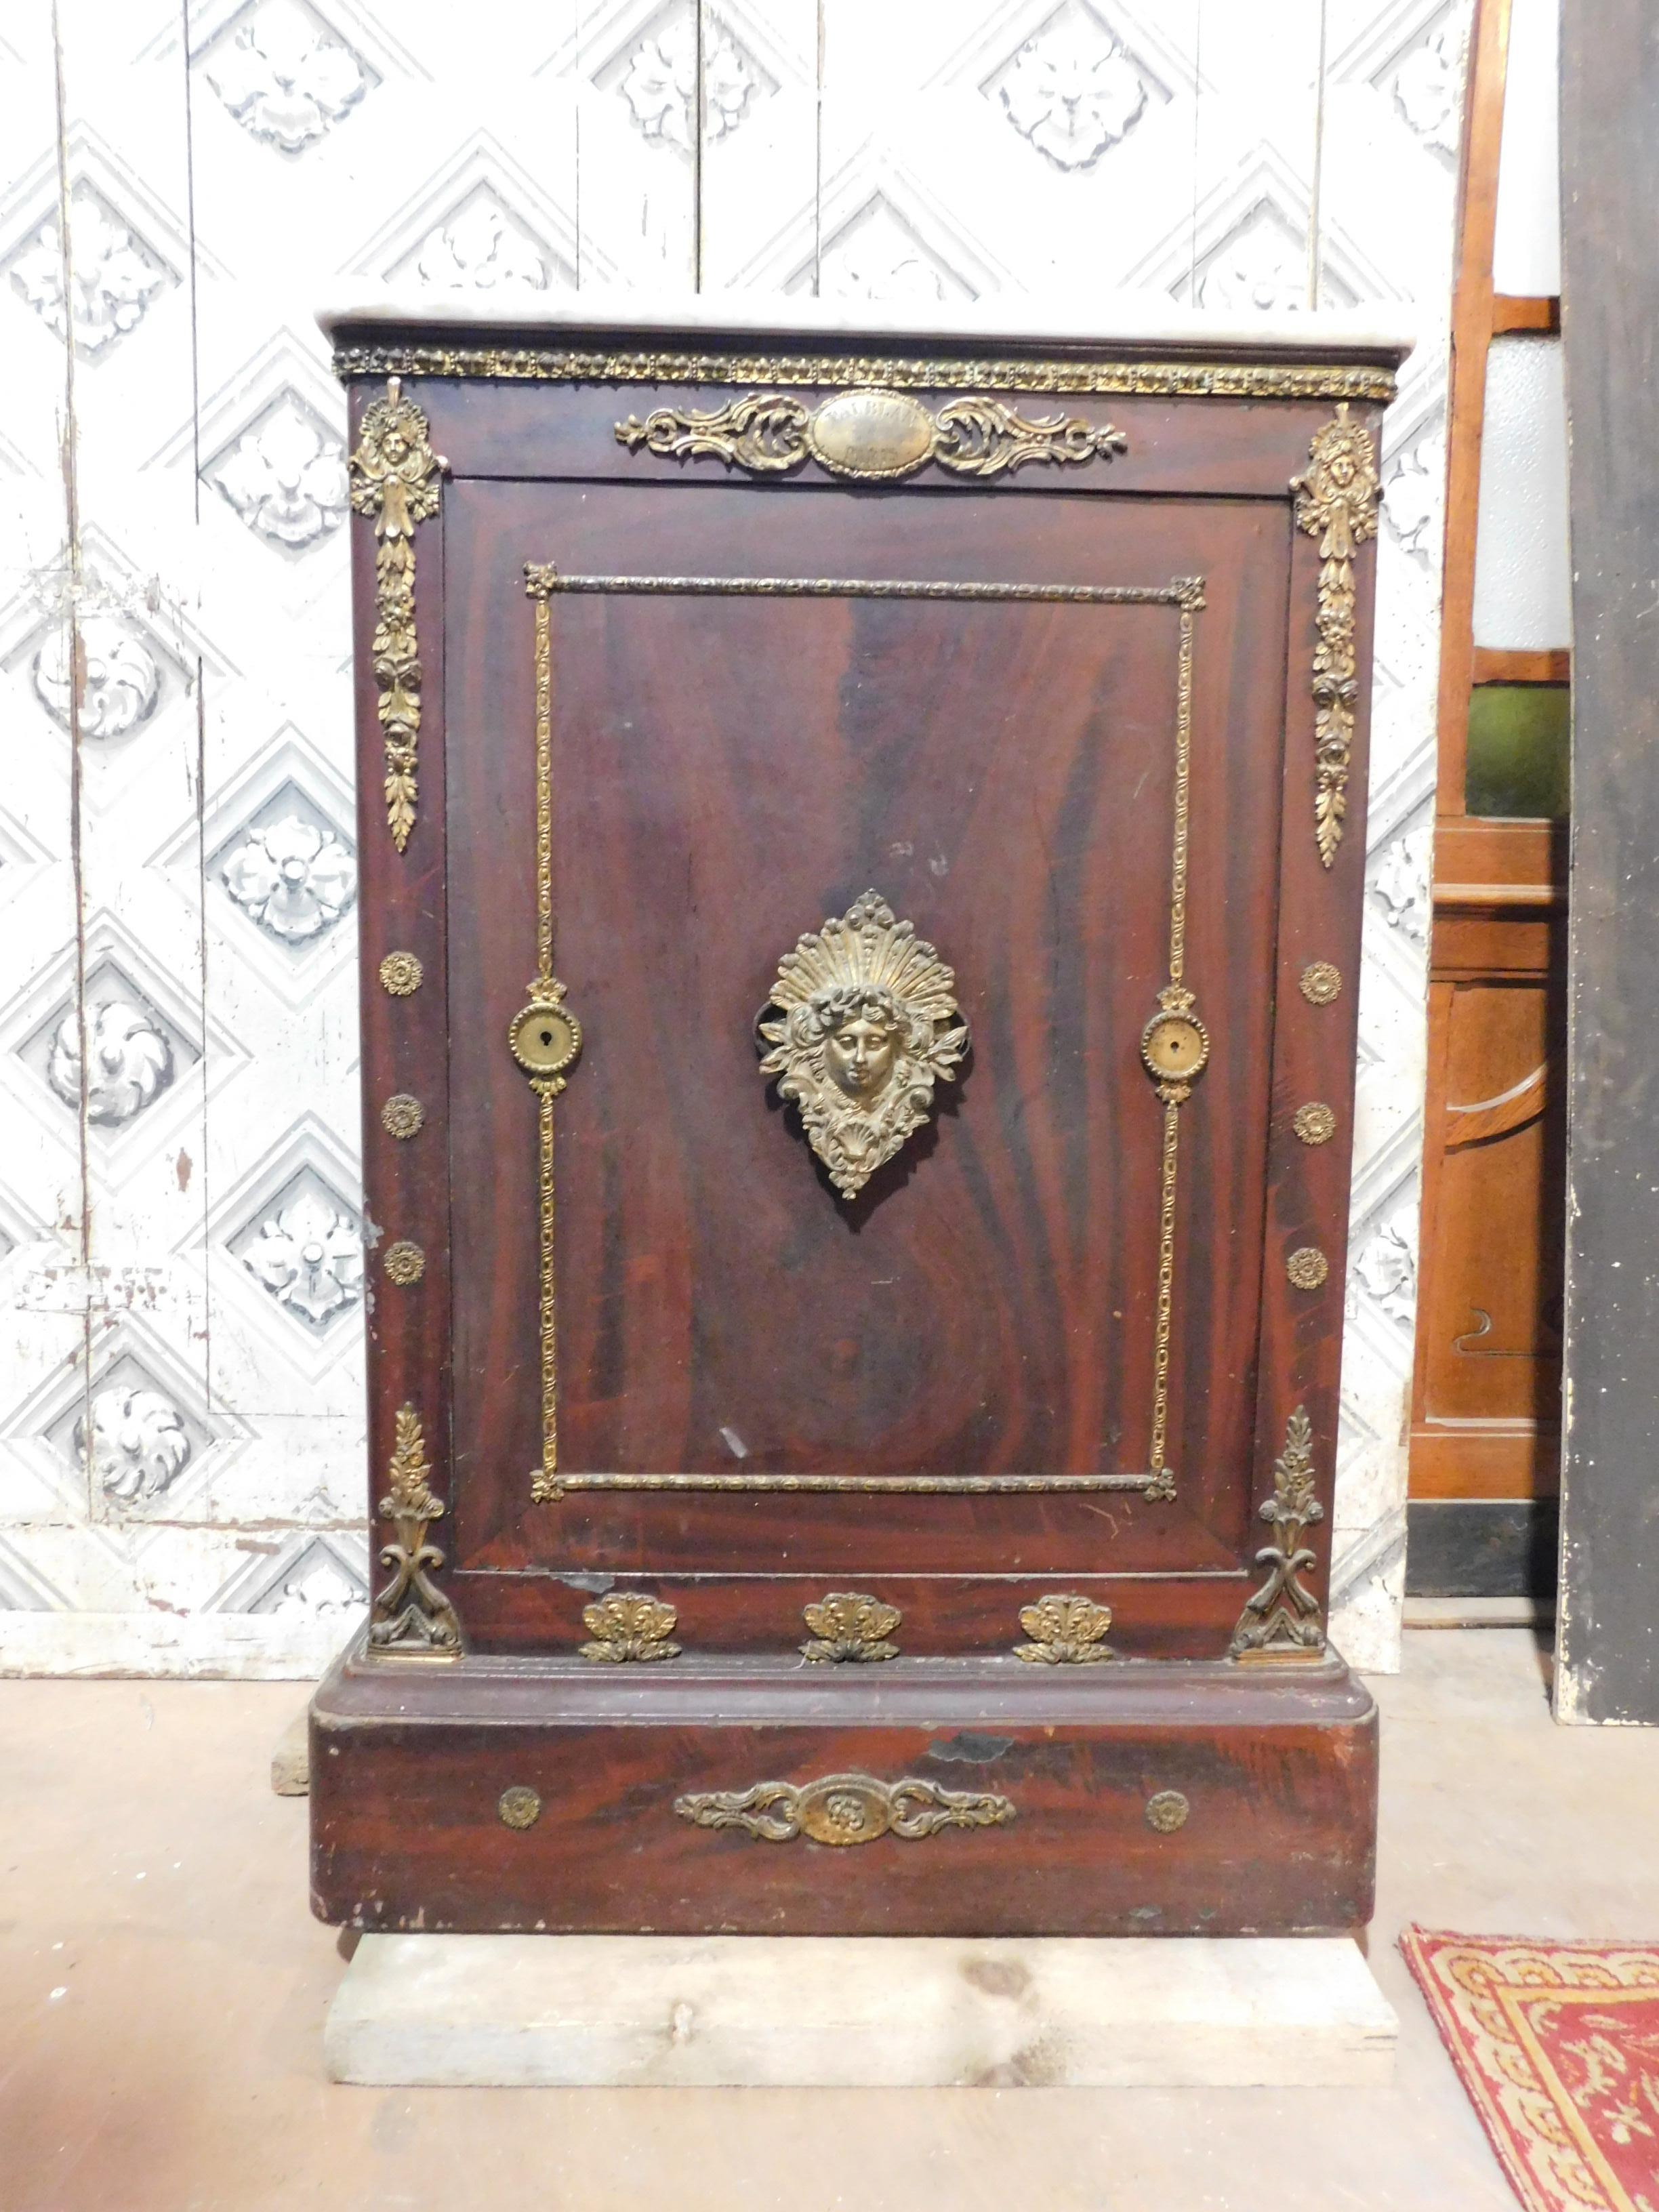 Antique safe in iron lacquered as imitation wood, opening with secret combination, enriched with gilded bronze friezes and upper marble top, trusted interior and blue lacquered with drawer, built in the 19th century in France (Paris), maximum size